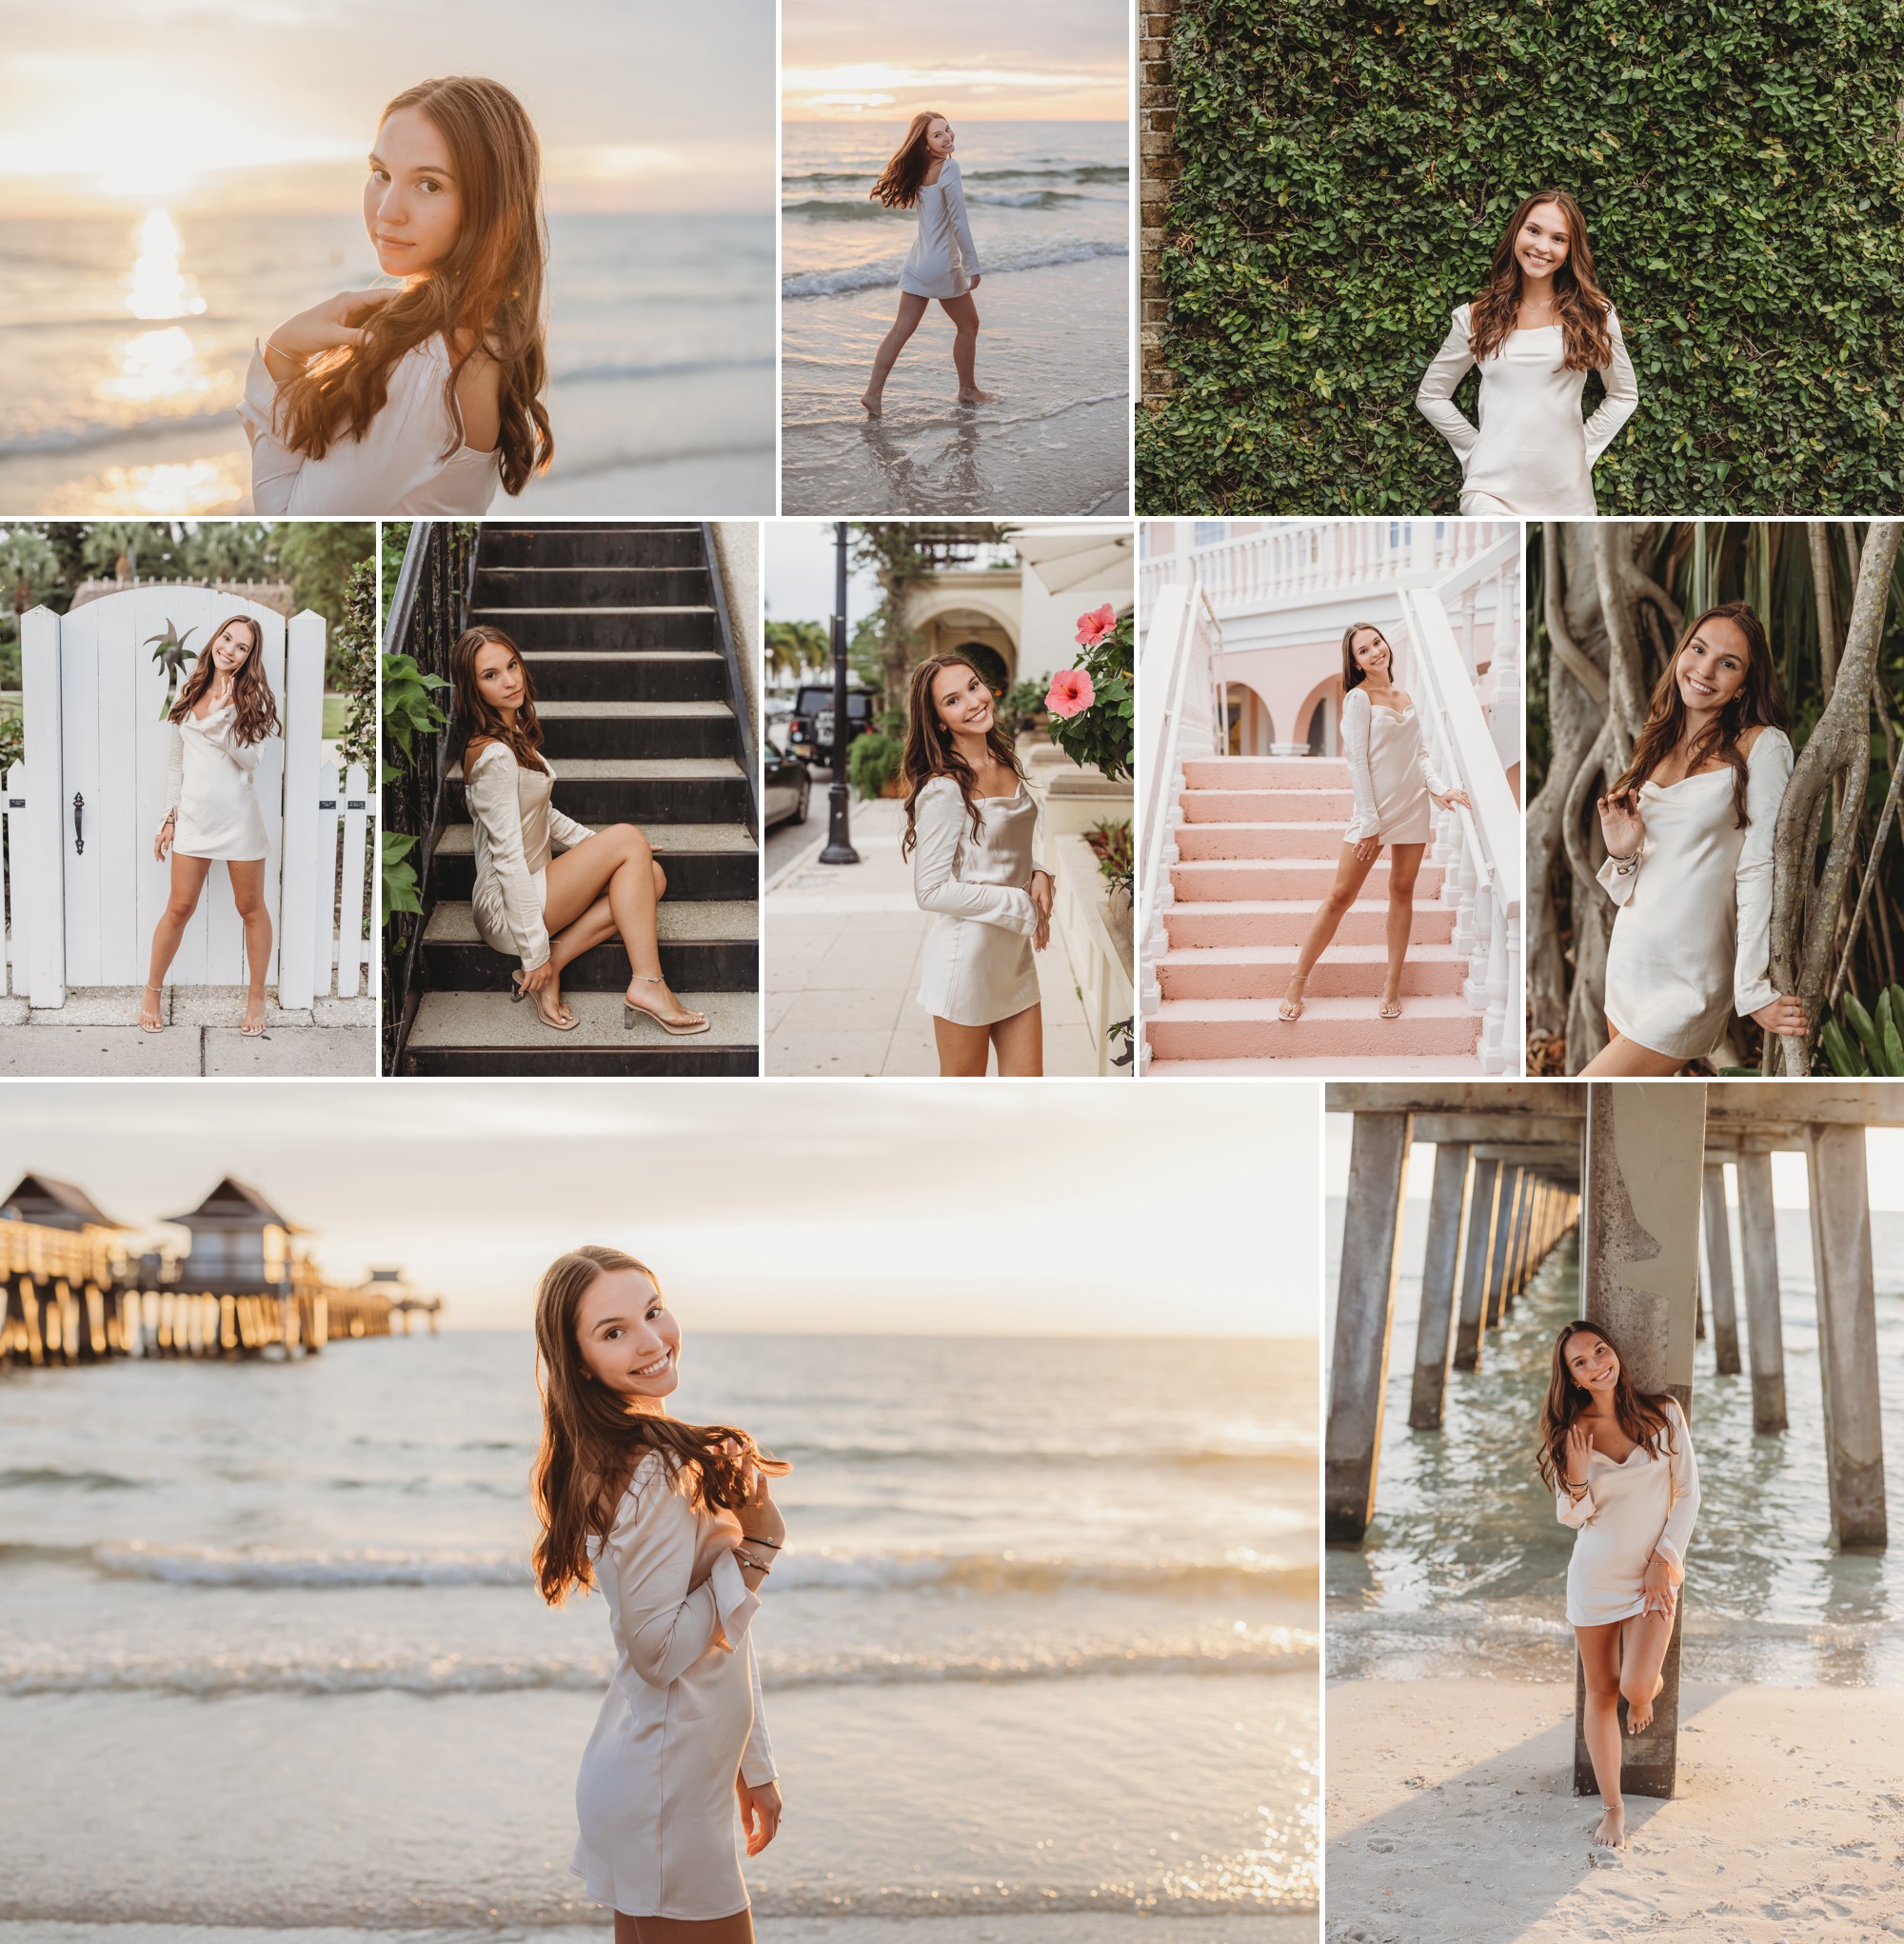 High school senior girl takes beach and town portraits in a beautiful beach town. Senior pictures at sunset and along the water.